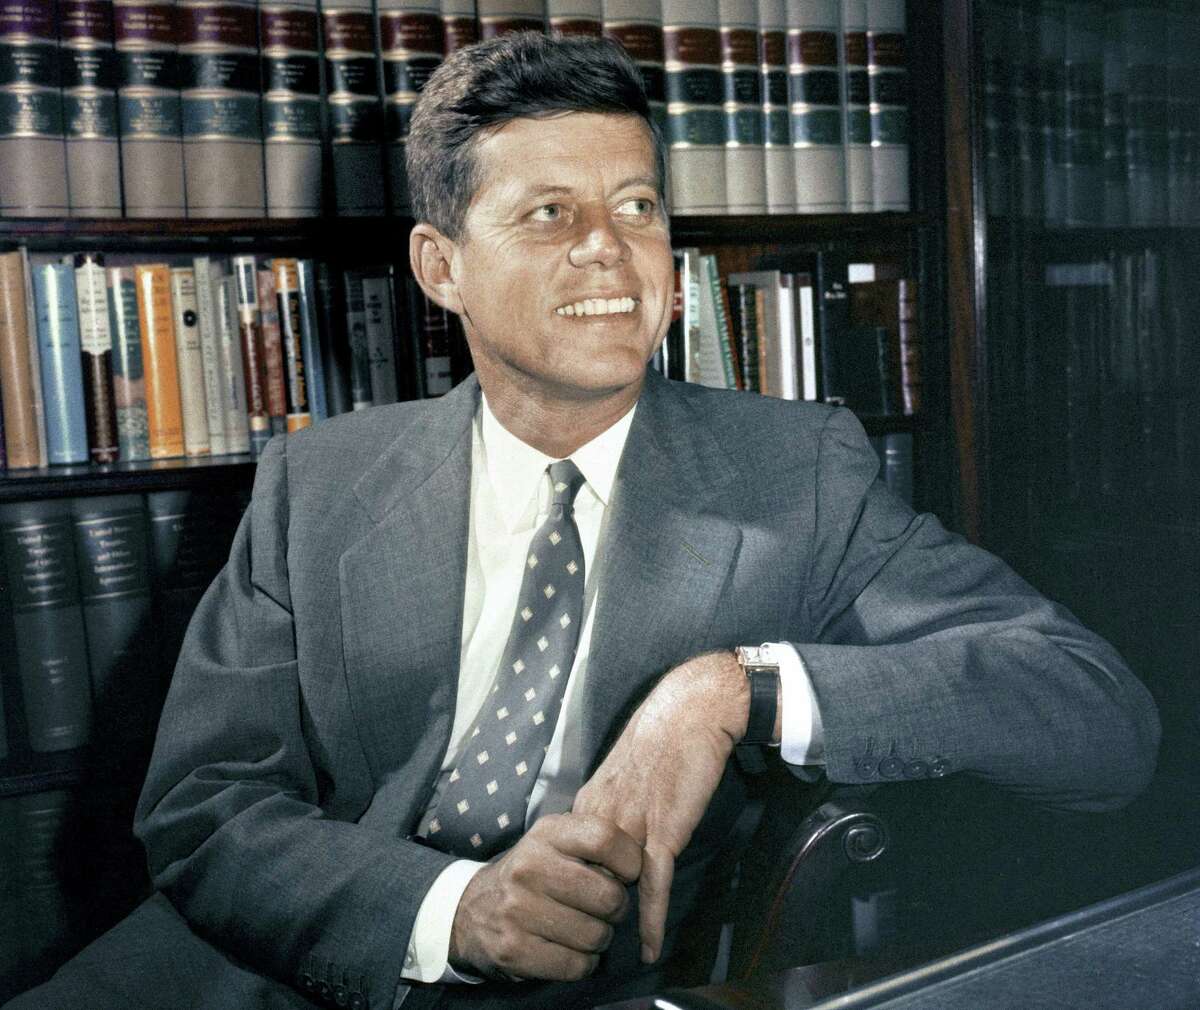 AP Photo, File In this Feb. 27, 1959, file photo, Sen. John F. Kennedy, D-Mass., is shown in his office in Washington. Monday, May 29, 2017 marks the 100-year anniversary of the birth of Kennedy, who went on to become the 35th President of the United States.